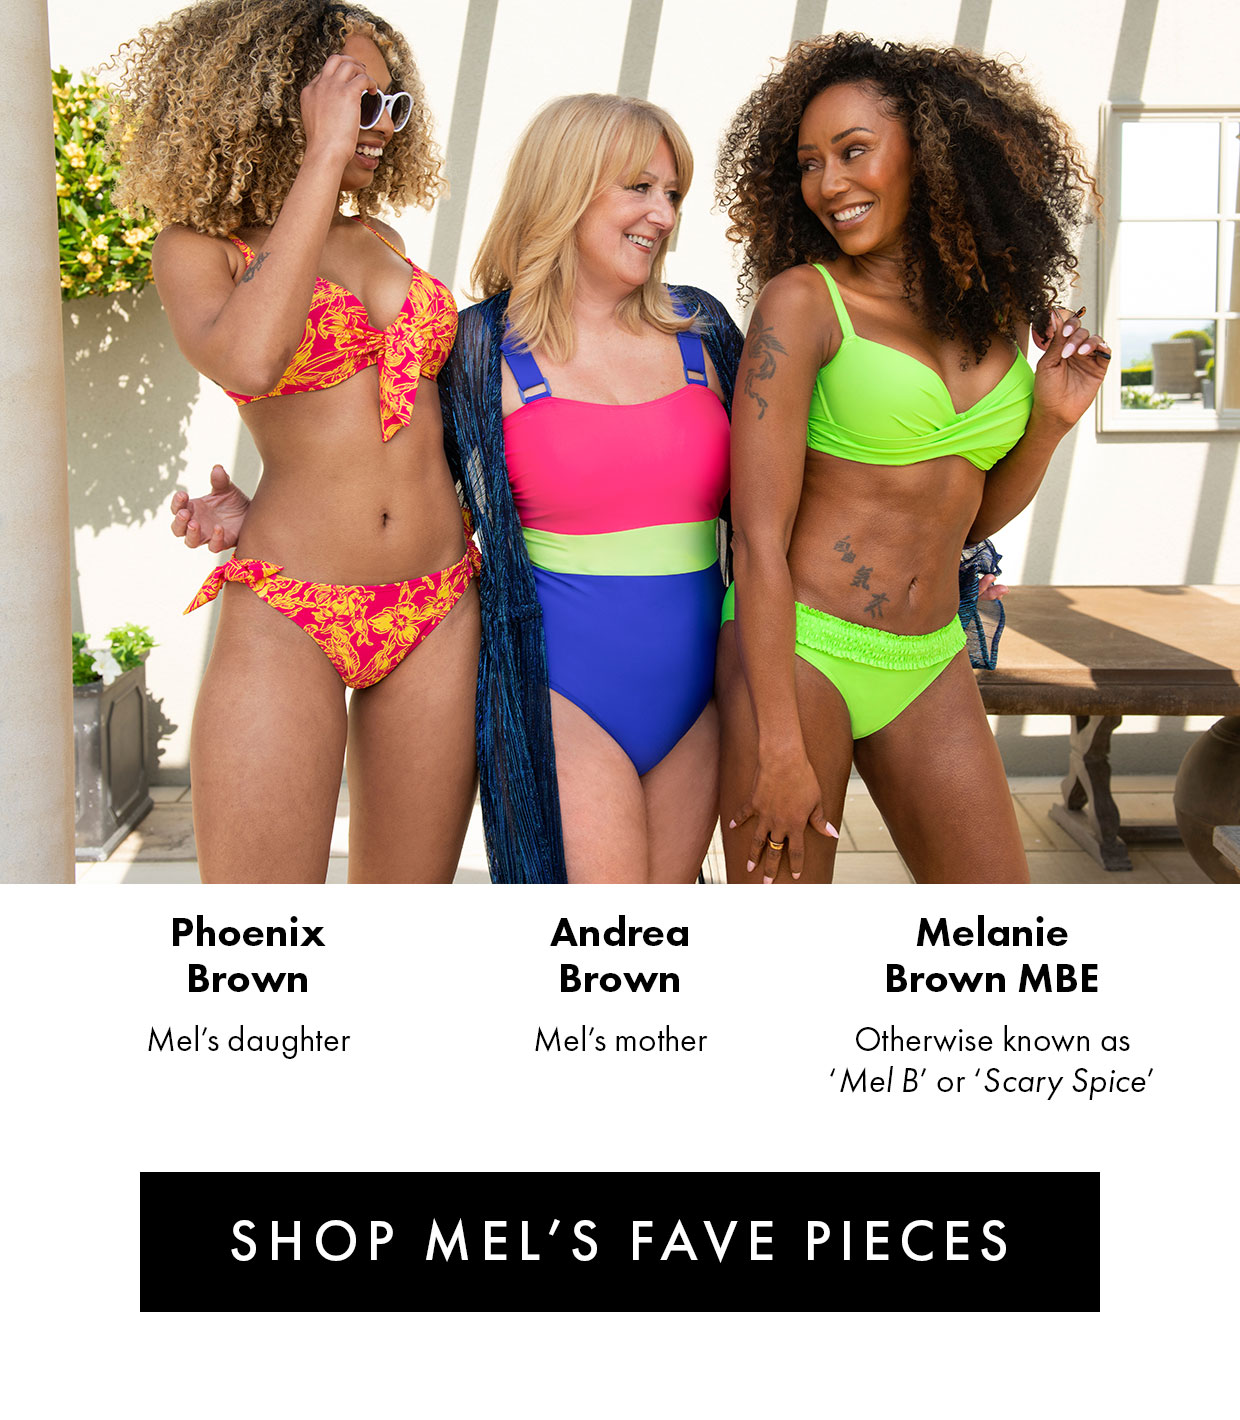 Melanie Brown MBE (otherwise known as 'Mel B' or 'Scary Spice'), Phoenix Brown (Mel's daughter), and Andrea Brown (Mel's mother). Shop Mel's Fave Pieces >